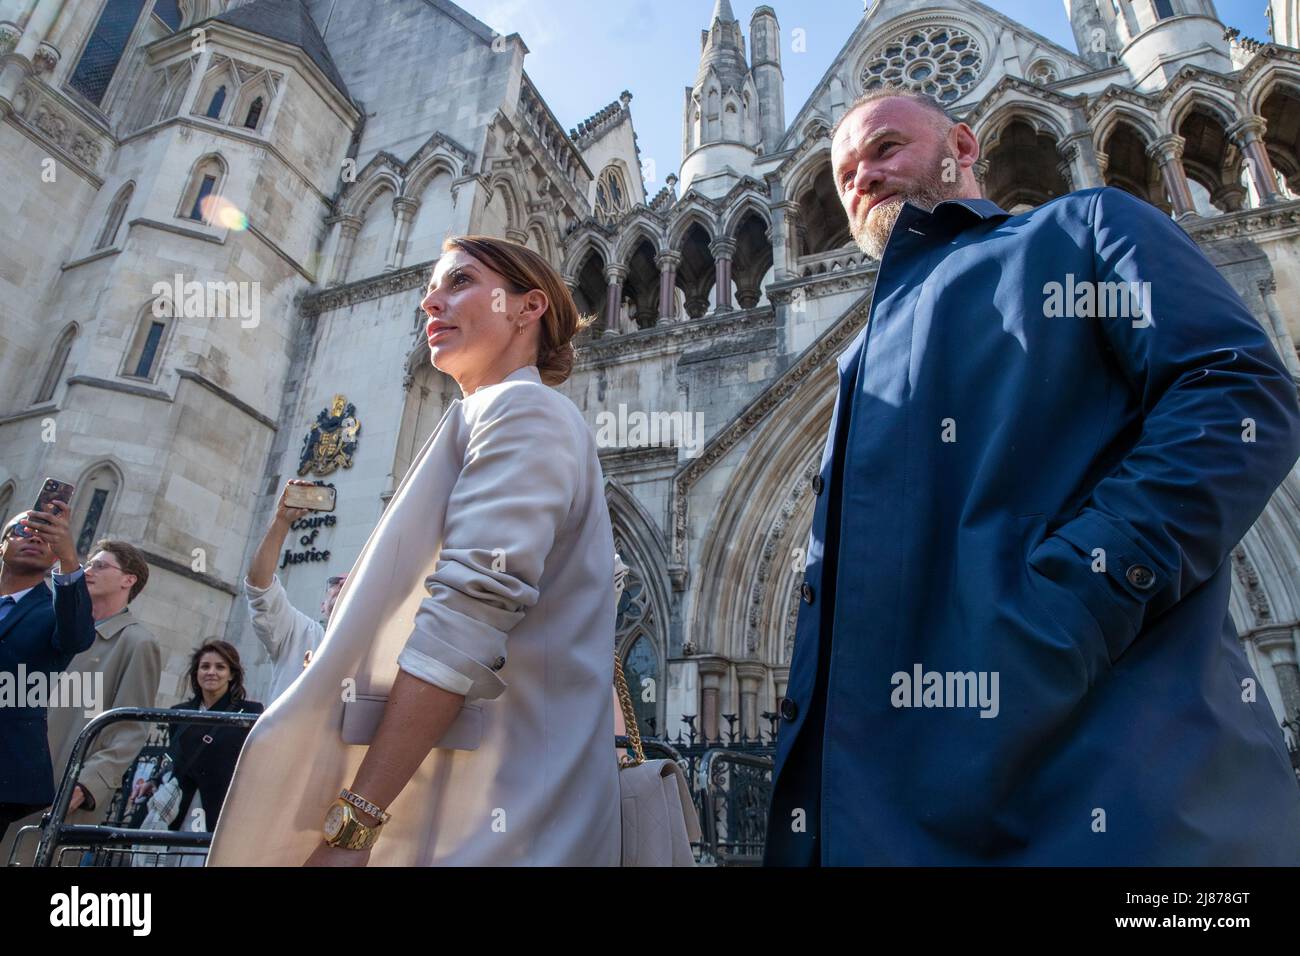 London, UK. 13th May, 2022. Coleen Rooney and Wayne Rooney leaves The Royal Courts of Justice after her libel case with Rebekah Vardy, Coleen Rooney who is the wife of Derby County manager and former England football player Wayne Rooney, and Rebekah Vardy, wife of Leicester City striker Jamie Vardy are locked in a libel battle also known as the 'Wagatha Christie' trial after accusations that Mrs Vardy leaked false stories about Mrs Rooney to the press. Credit: Lucy North/Alamy Live News Stock Photo